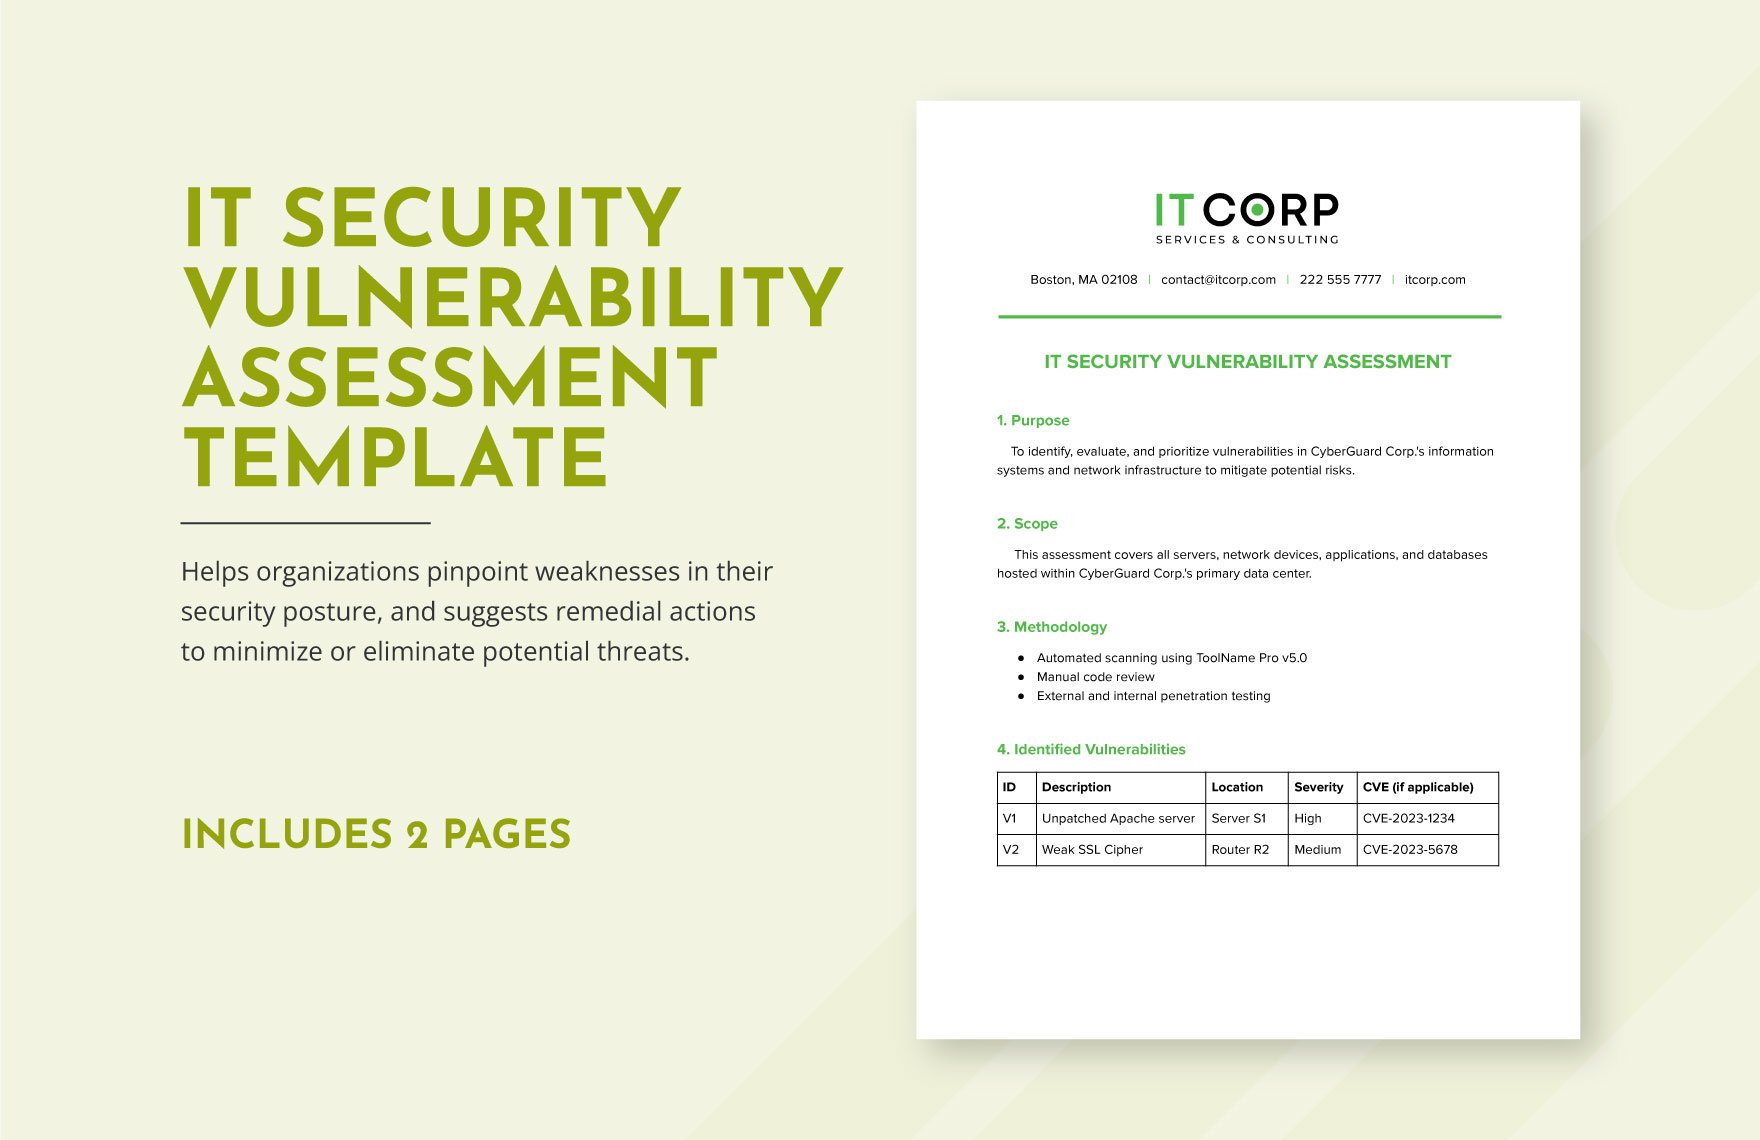 IT Security Vulnerability Assessment Template